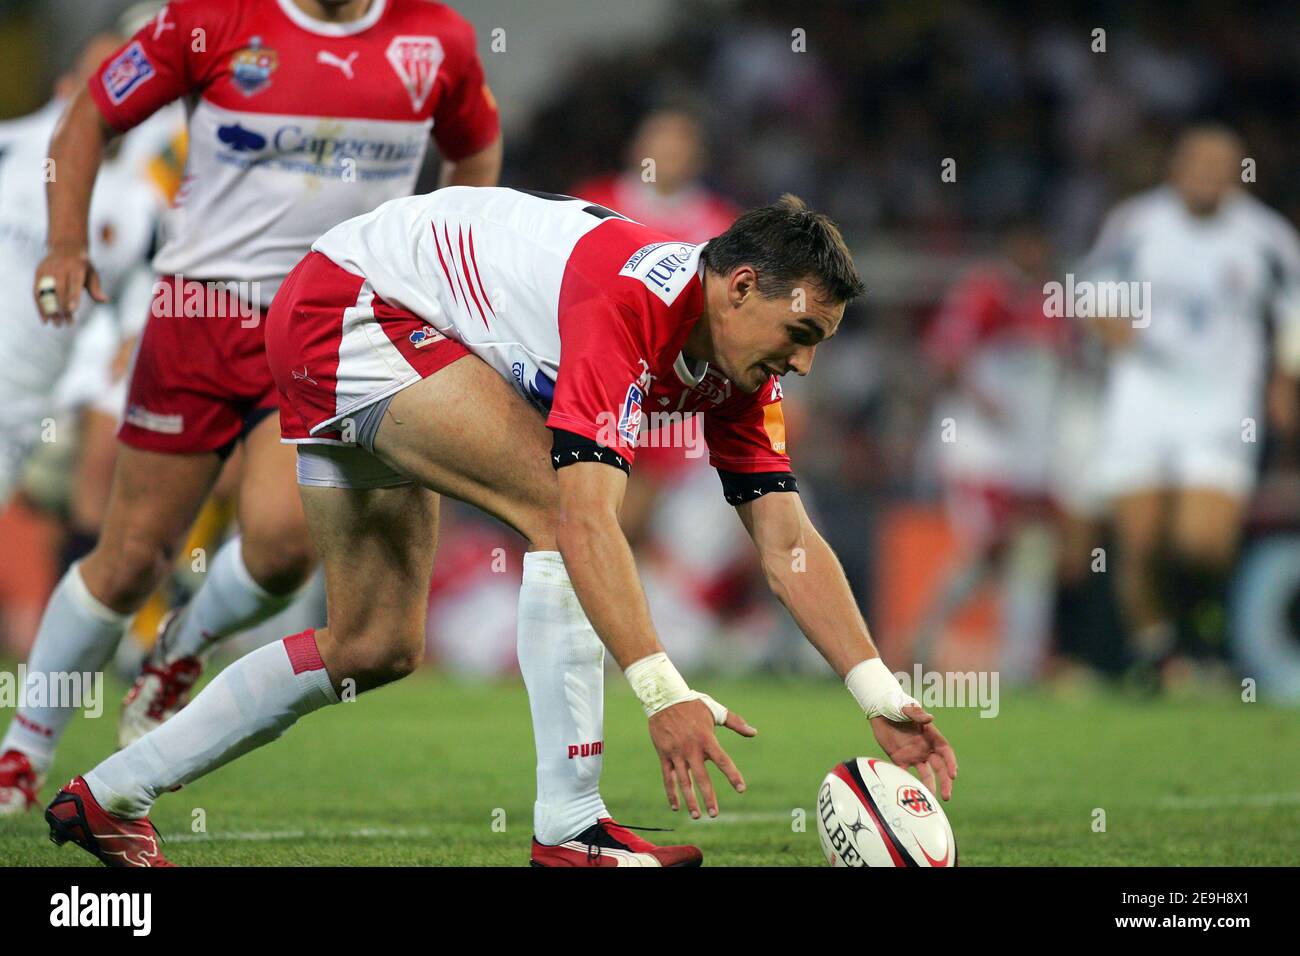 Biarritz Olympique's Nicolas Brusque in action during the French Top 14 rugby Championship, Stade Toulousain vs Biarritz Olympique in Toulouse, France, on September 3, 2006. Toulouse won 20-3. Photo by Manuel Blondeau/Cameleon/ABACAPRESS.COM Stock Photo